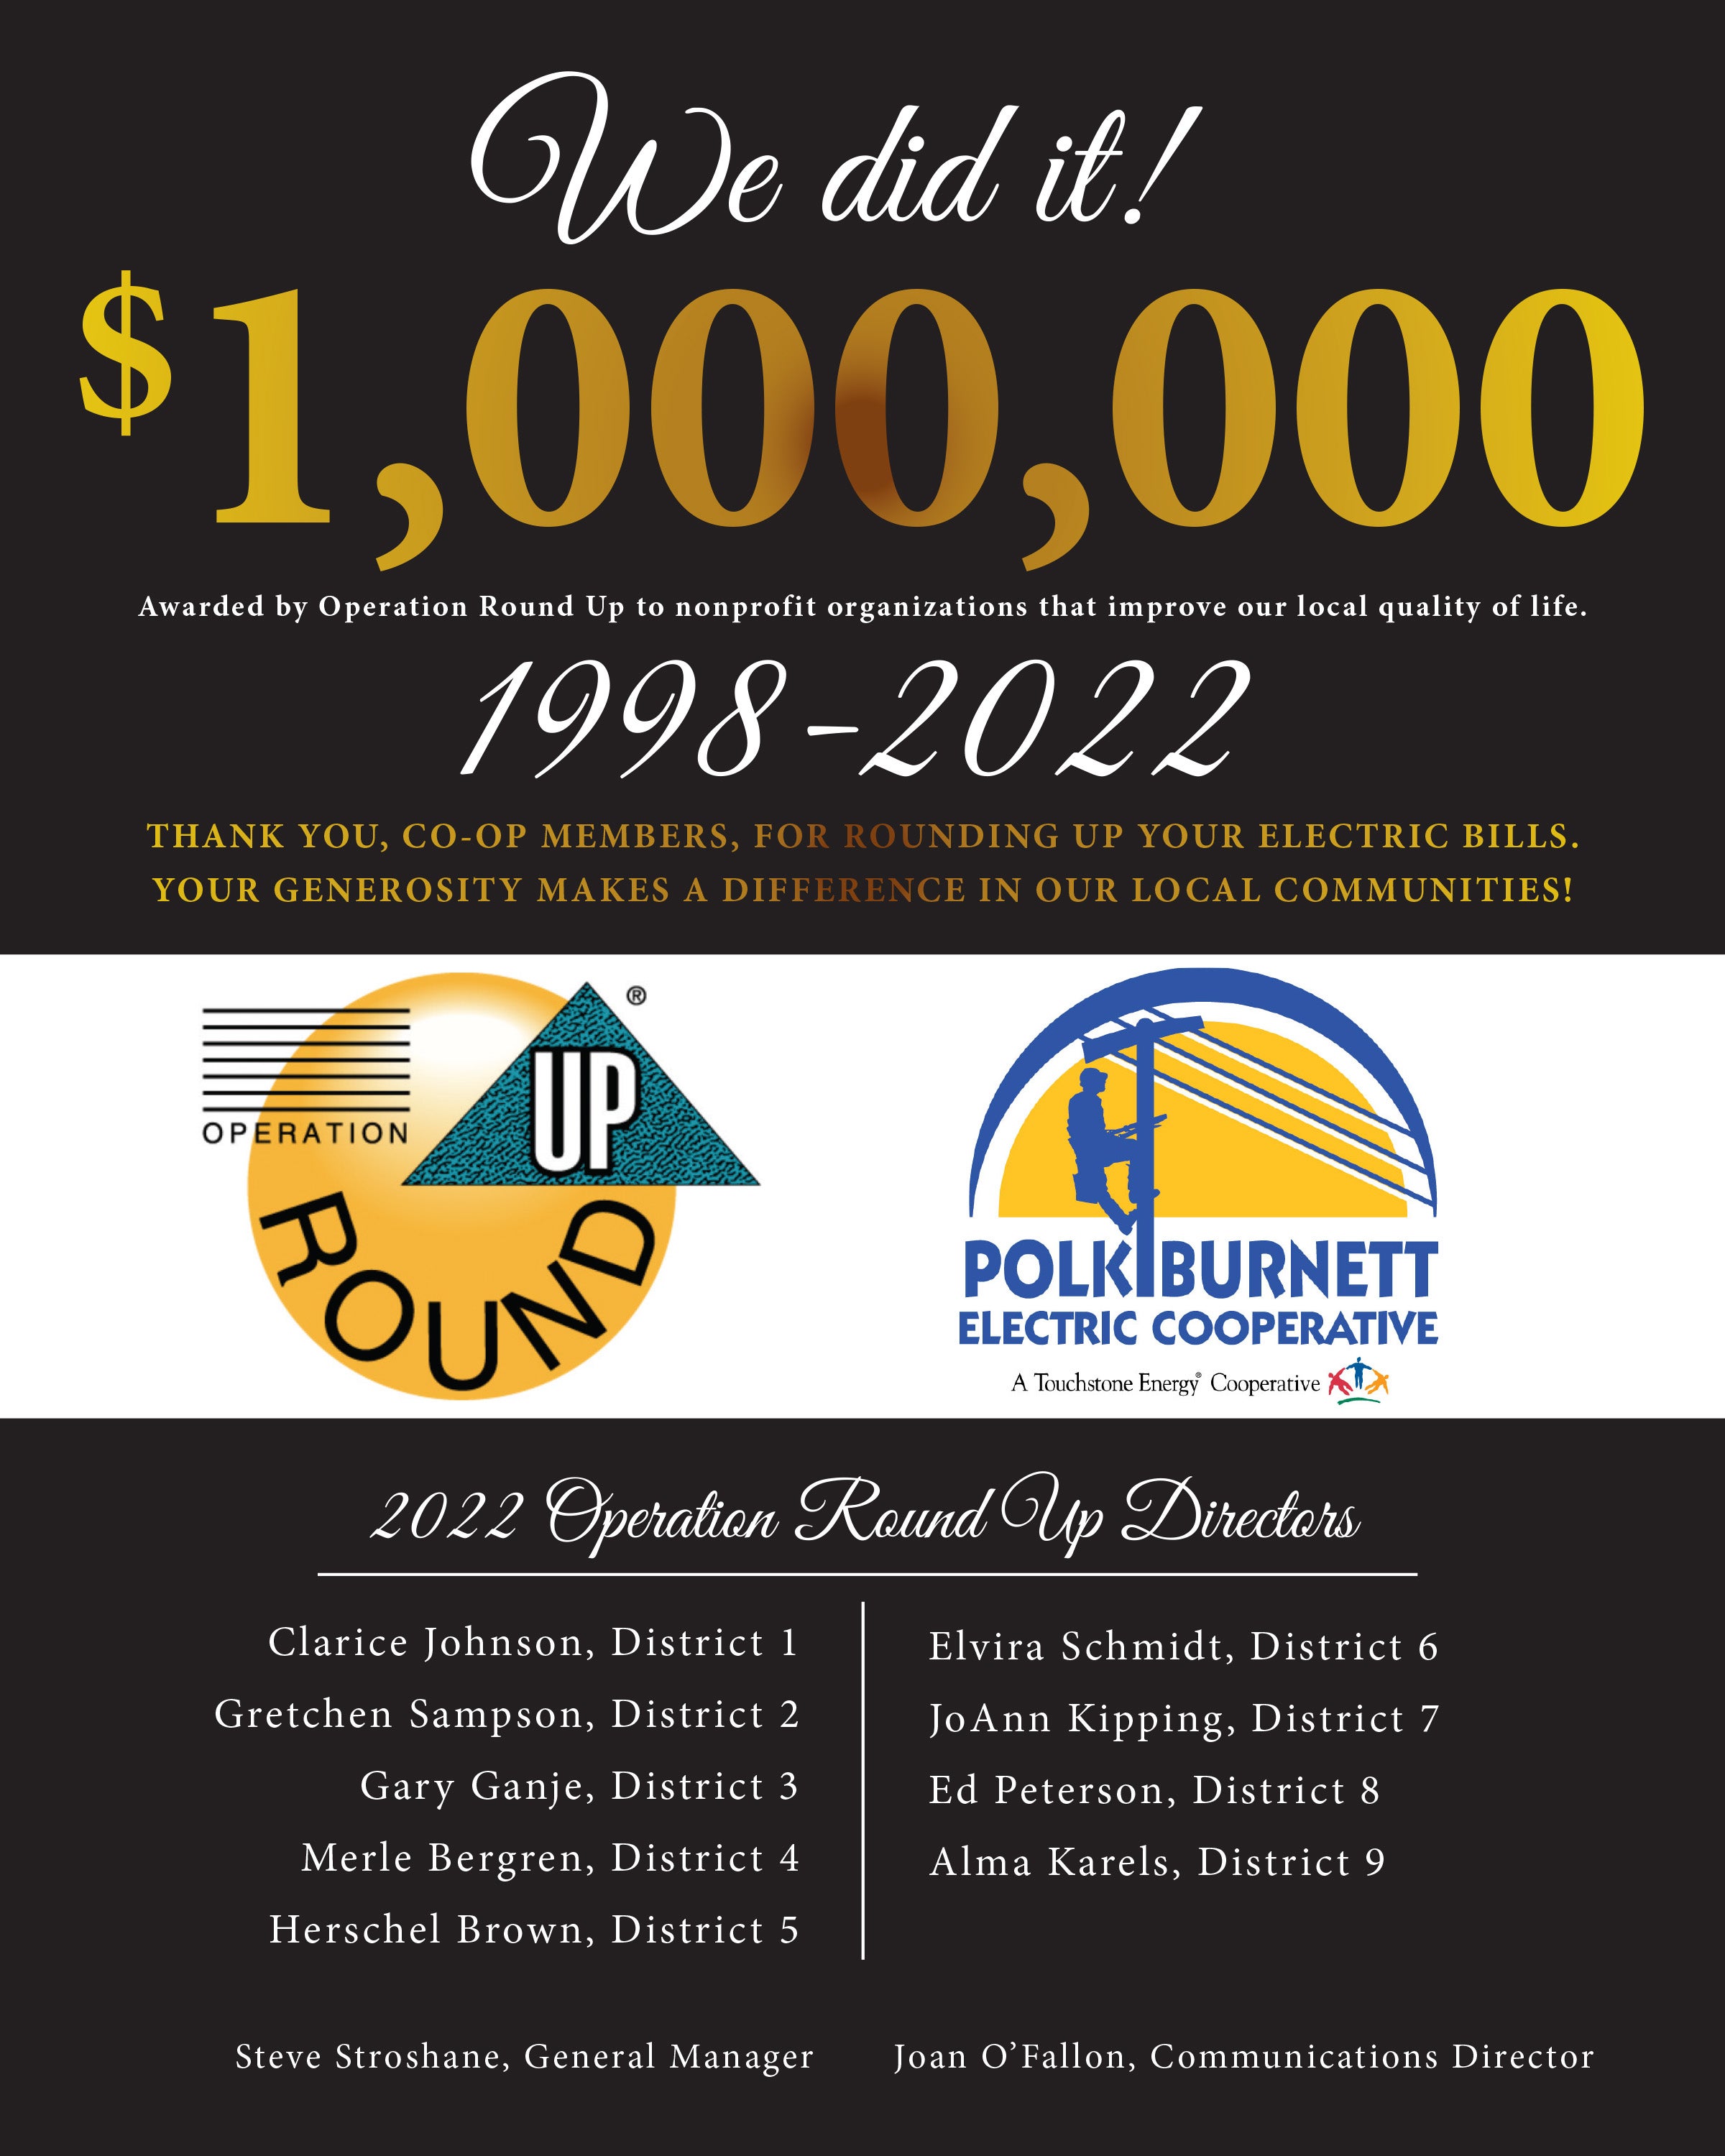 Operation Round Up reaches $1,000,000 in giving, 1998-2022!